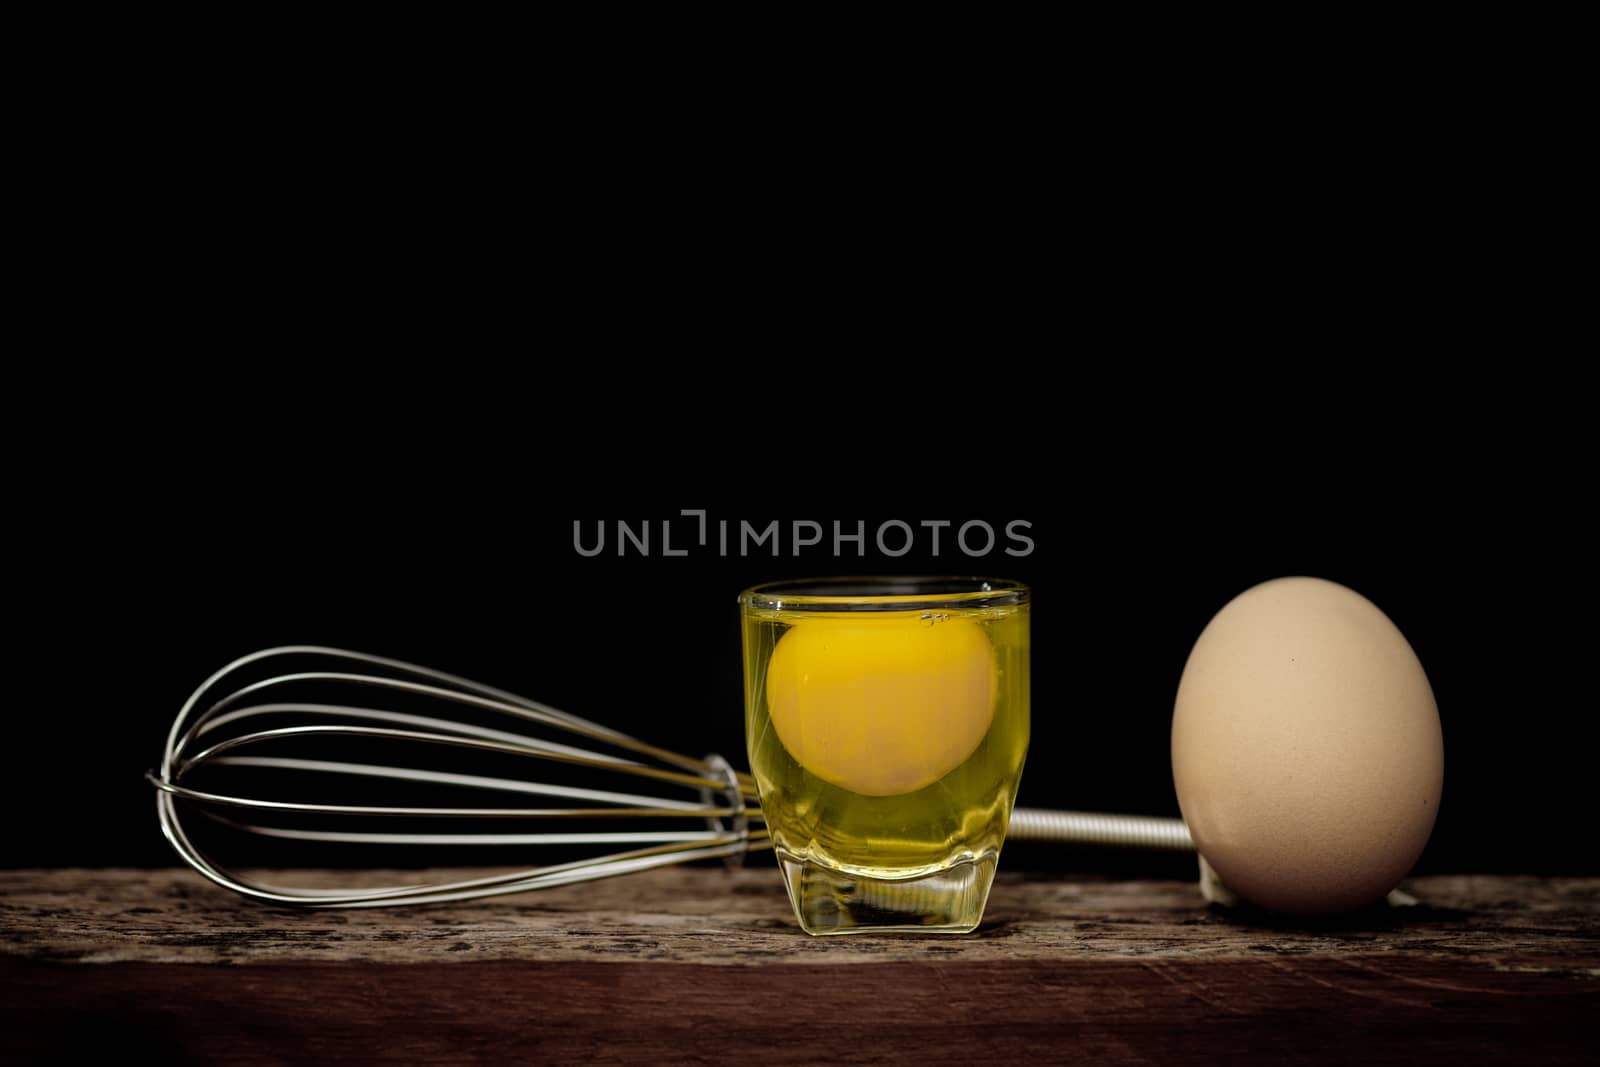 Still life-Eggs and yolks in glass arranged in a black scene, Egg is beneficial to the body, Food concept. dark tone.